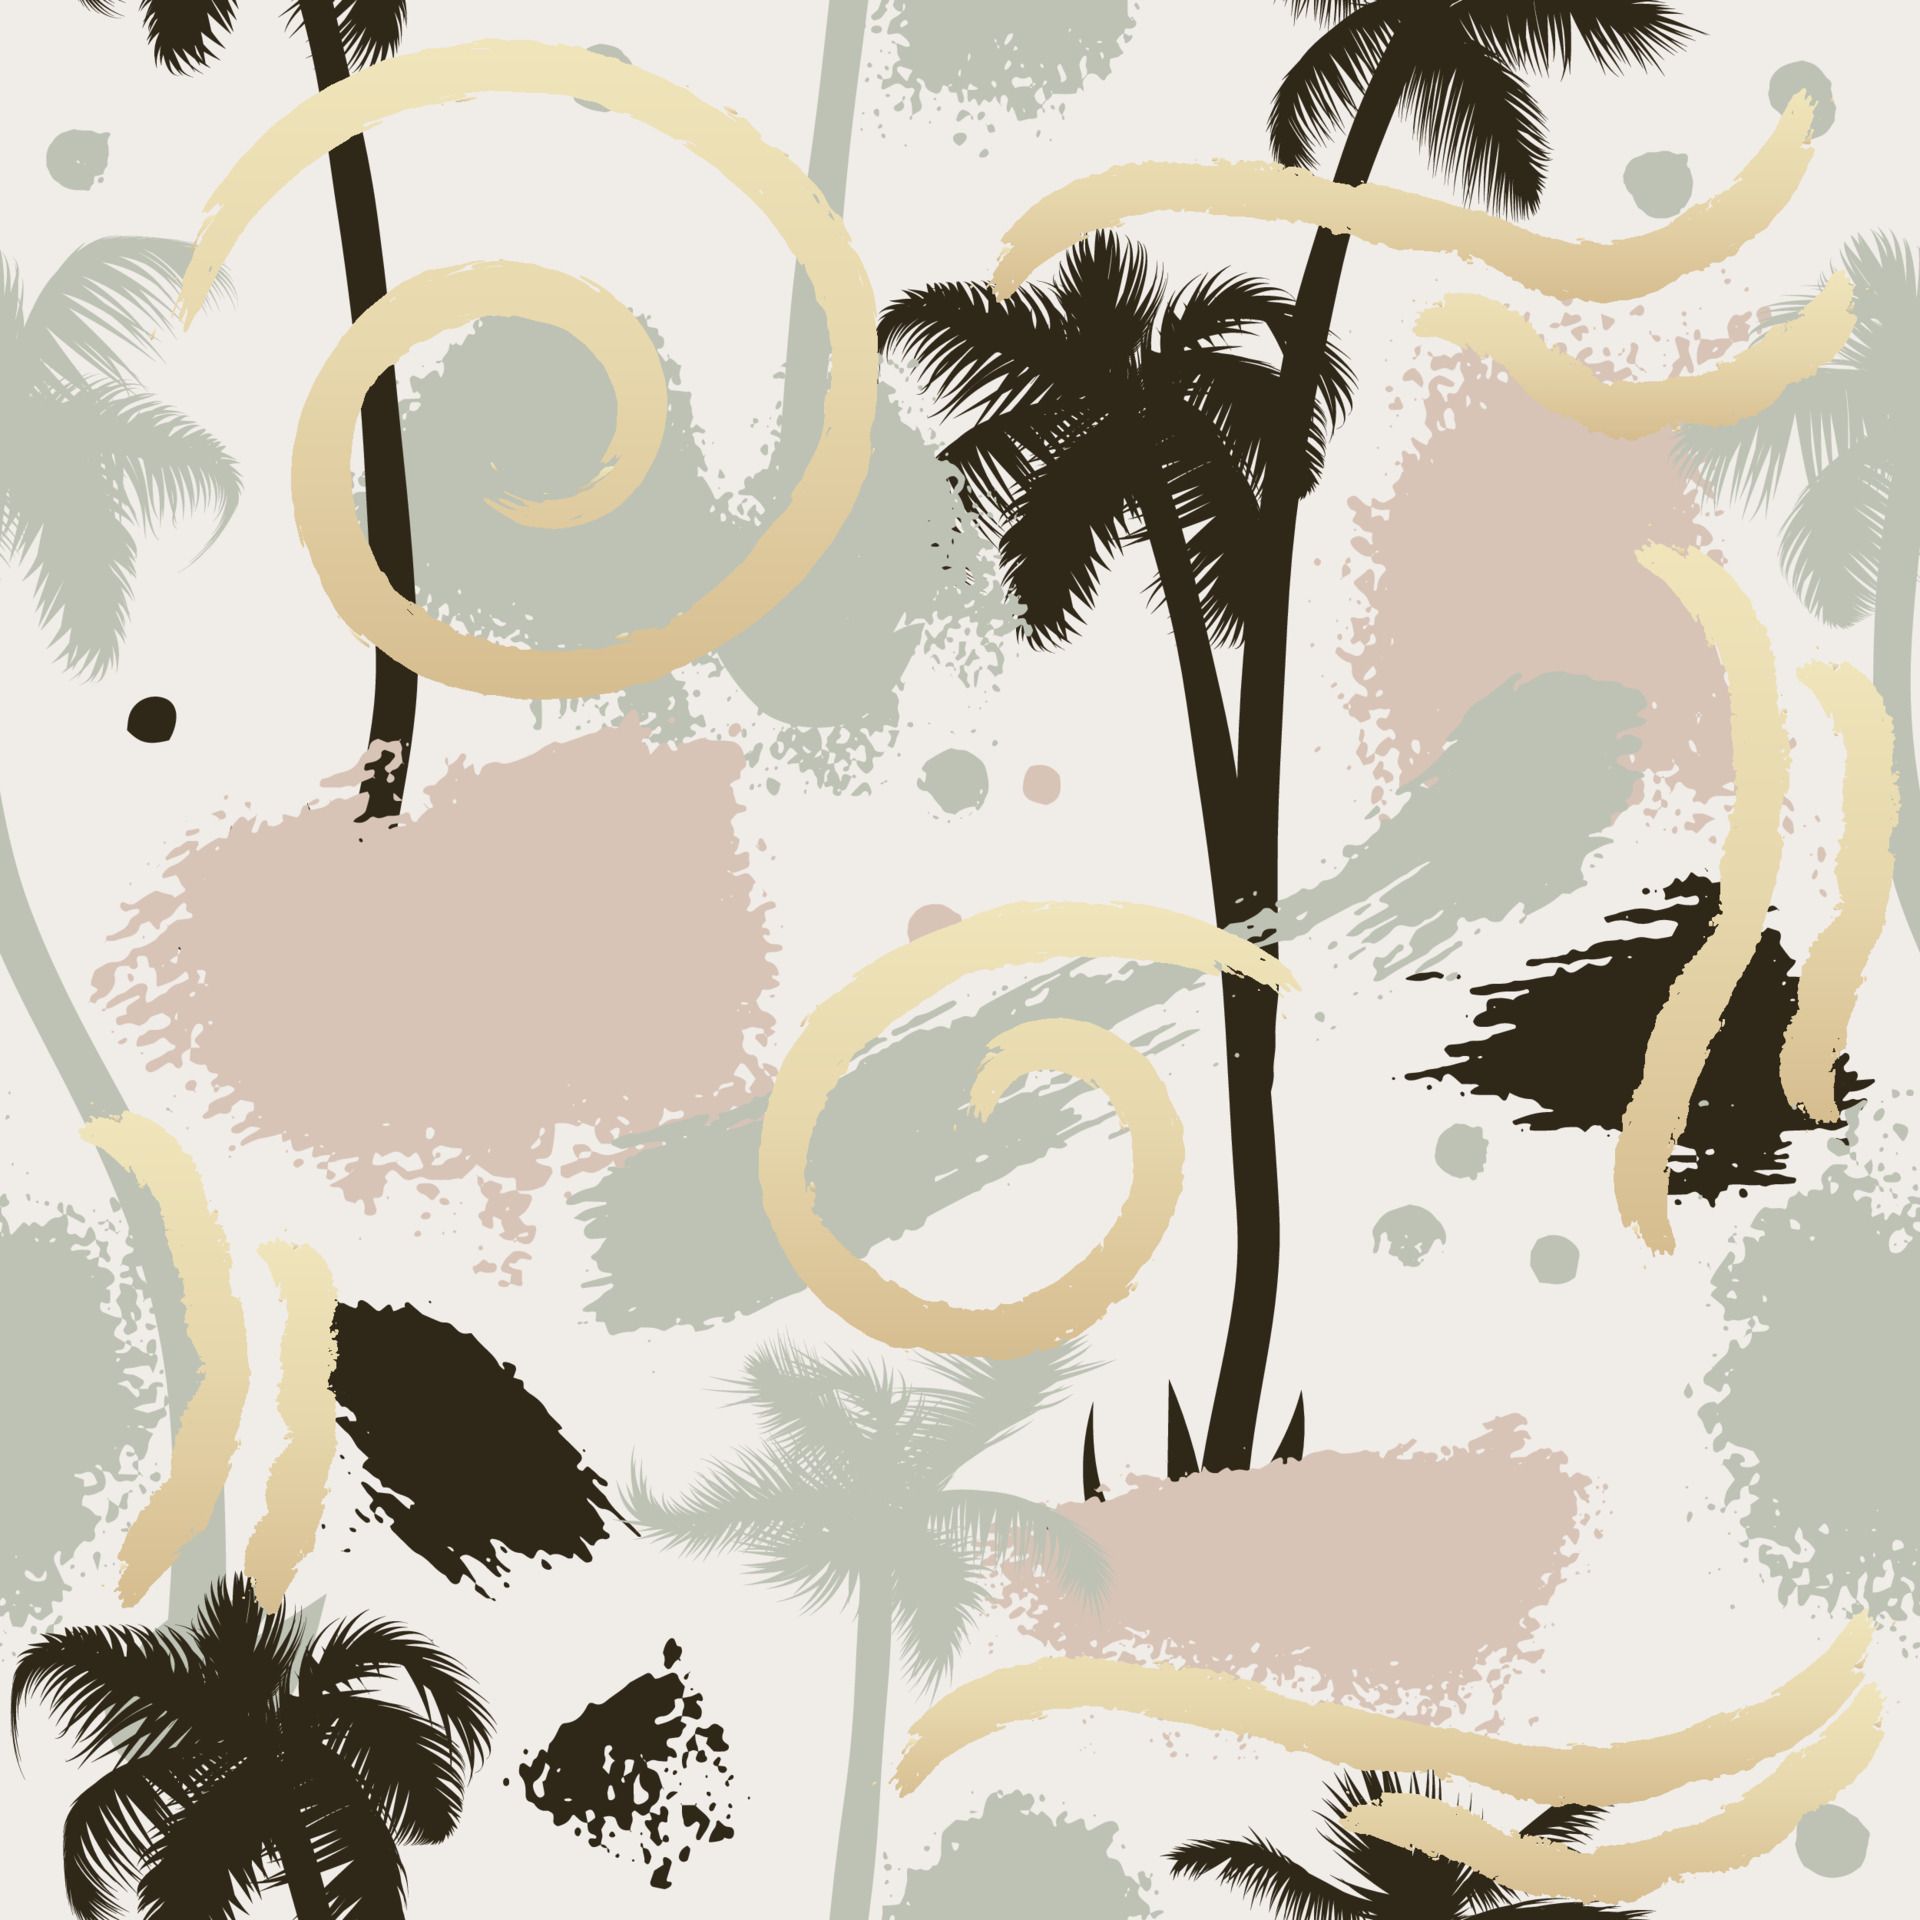 Abstract hand drawn tropical palm tree seamless pattern or background, brush painted textures, elements. Fashion grunge collage. Postcard, textile, wallpaper. Gold, pink, black and beige